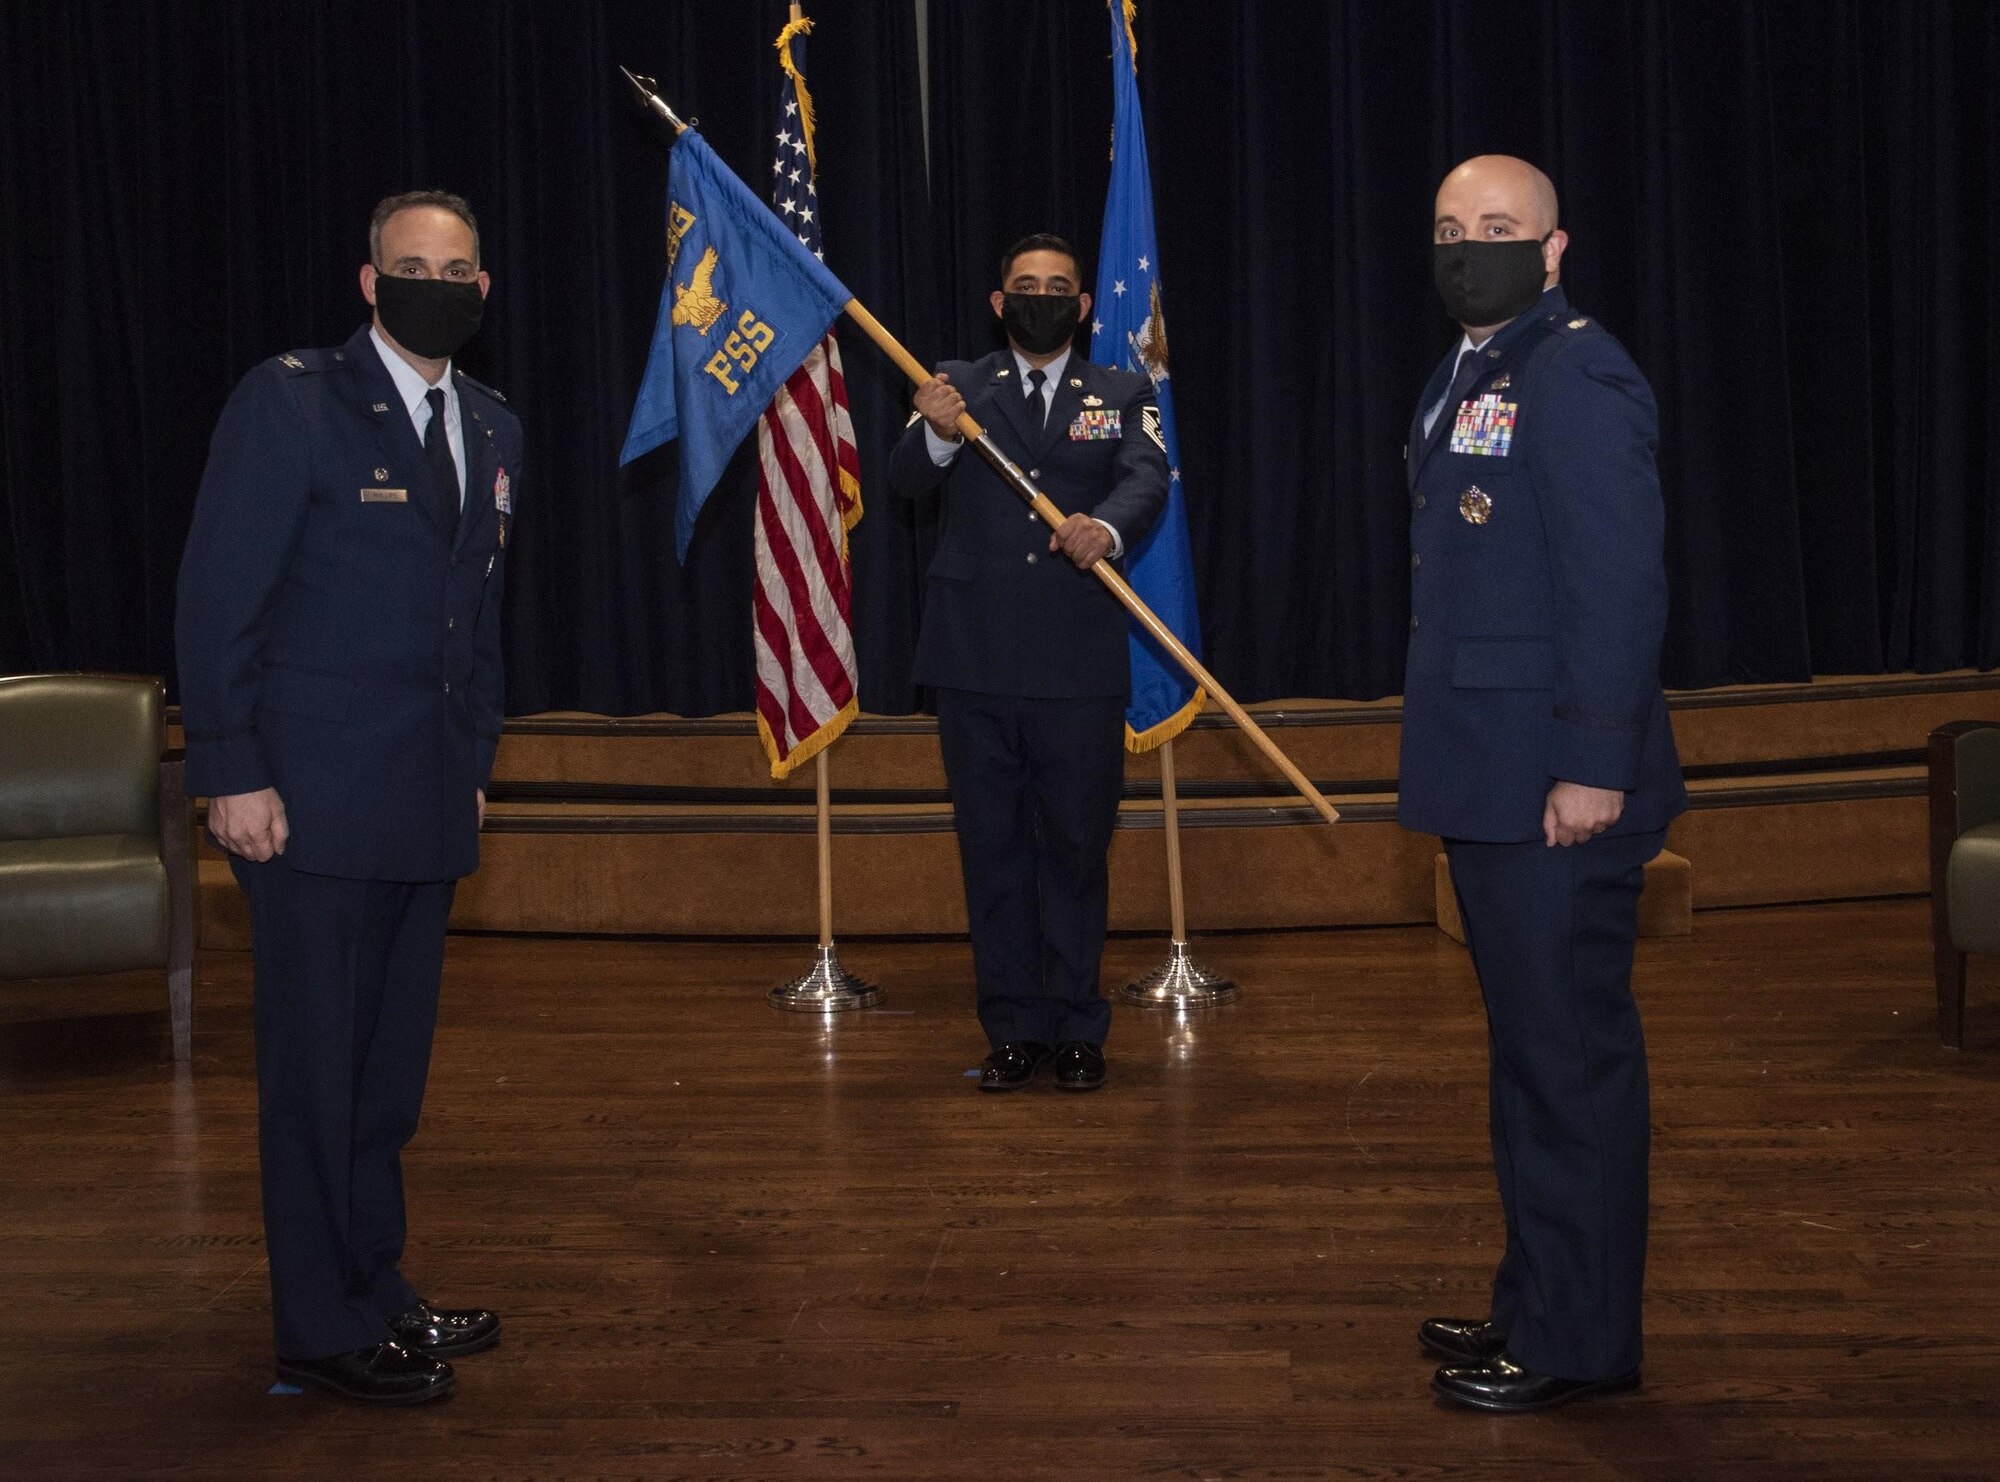 U.S. Air Force Col. Edward Phillips, 6th Mission Support Group commander, ceremoniously passes the 6th Force Support Squadron (FSS) guidon to Lt. Col. James Lupher, the in-coming 6th FSS commander during a change of command ceremony at MacDill Air Force Base, Fla., June 23, 2020.